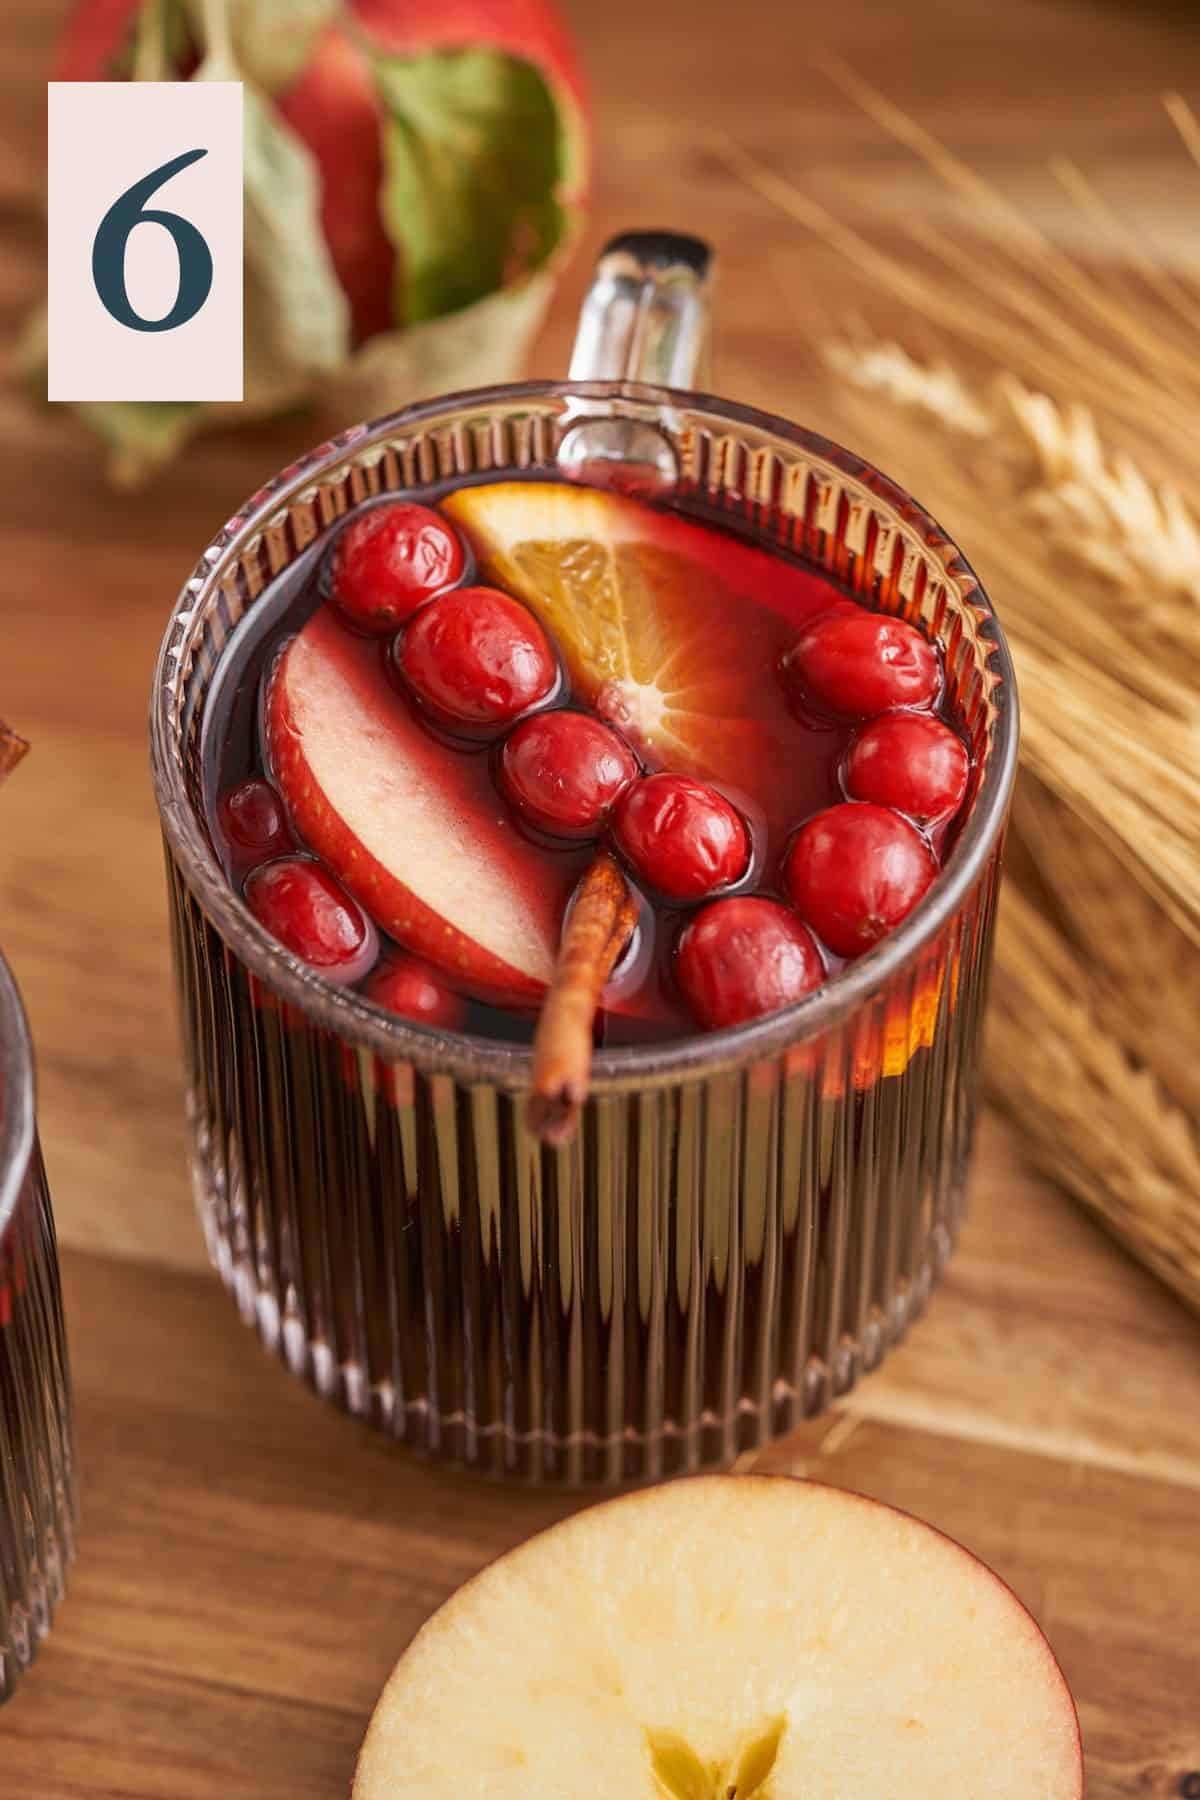 lovely cup full of mulled wine with fresh cranberries, apple slices, orange rounds and a cinnamon stick on a wood table with dried wheat stalks.